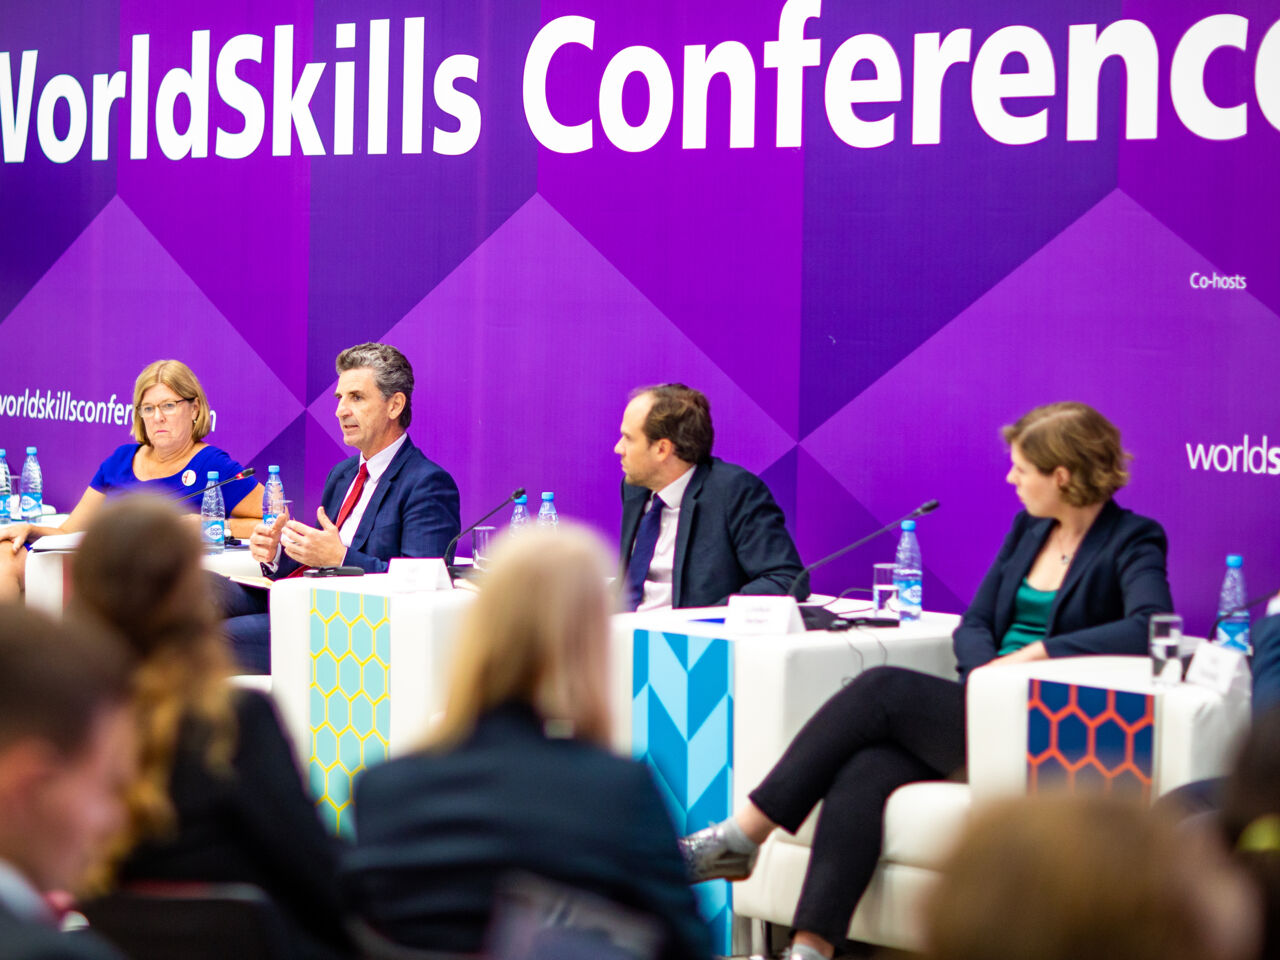 Why it is the right place and time for WorldSkills Conference 2024